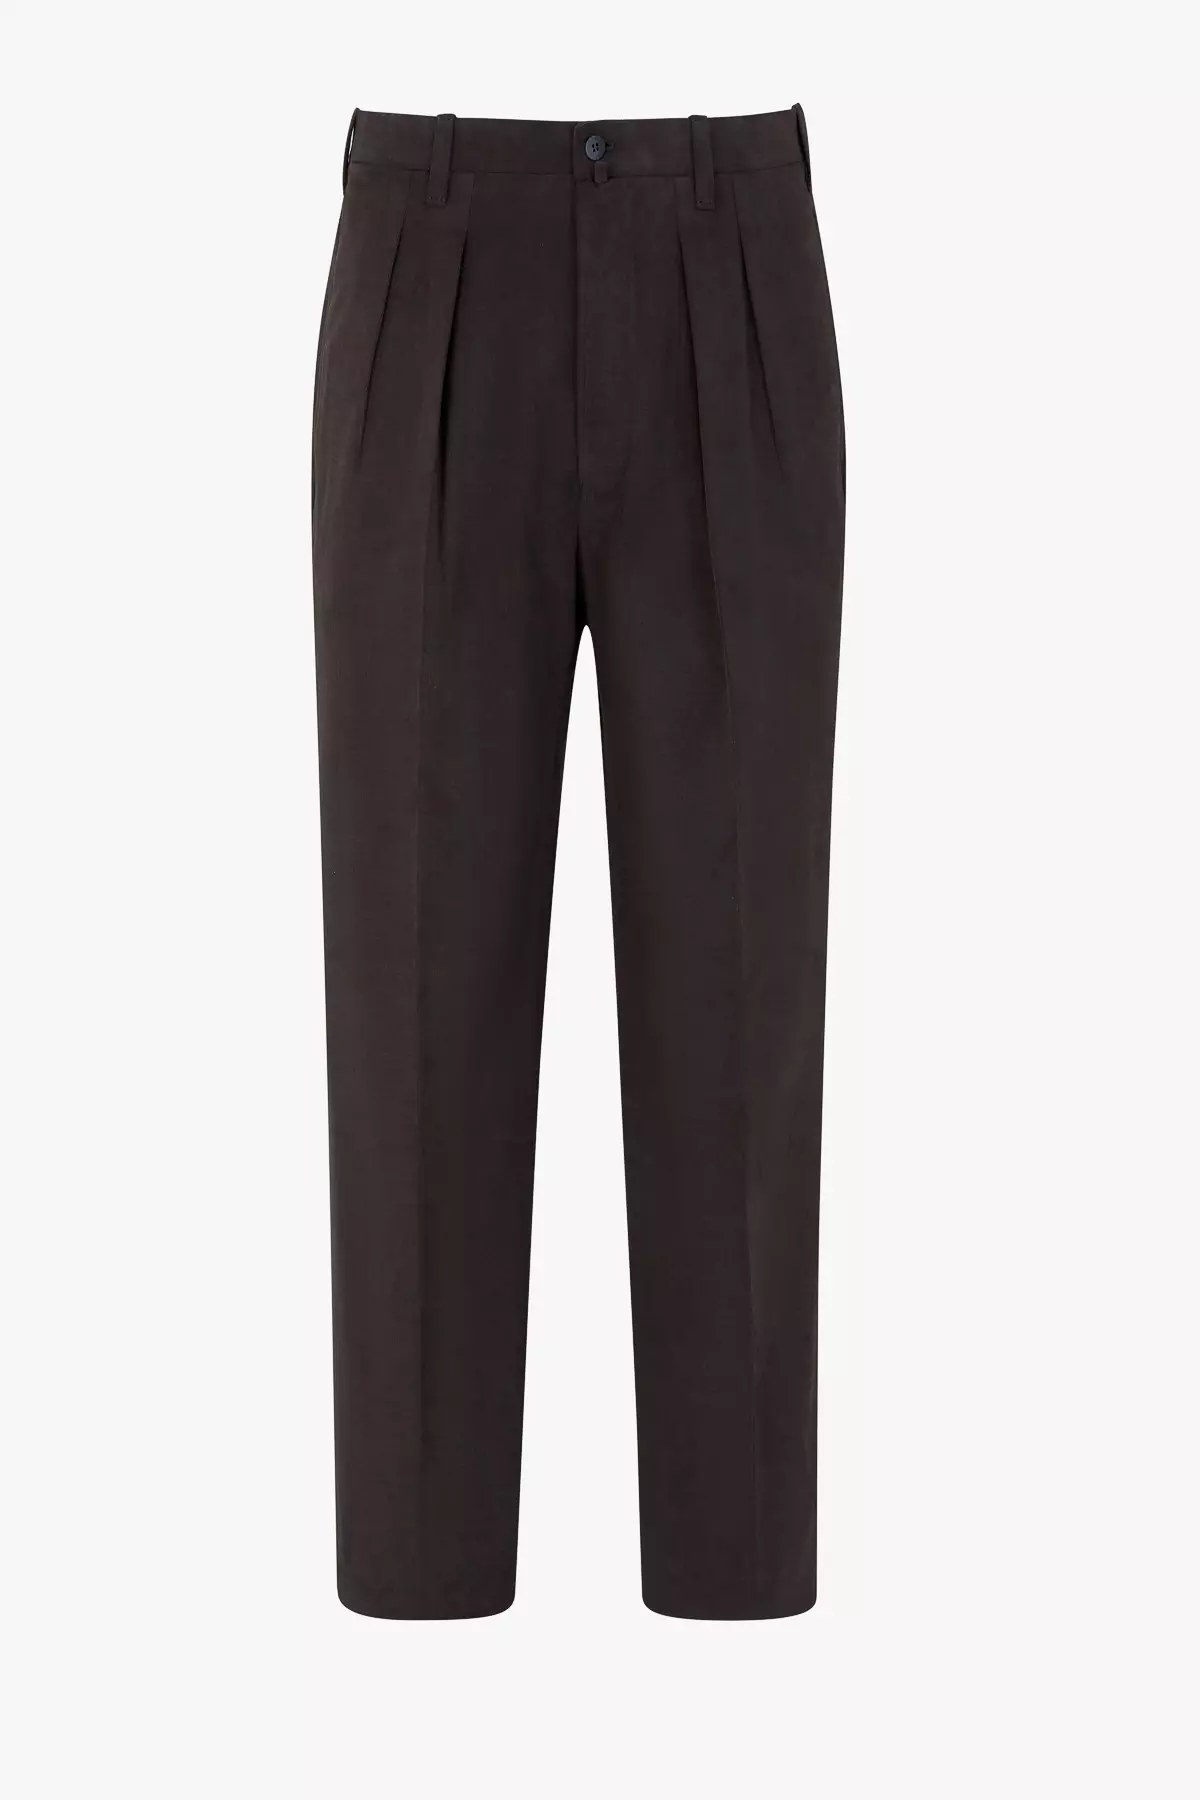 Umberto Trousers in Cotton Drill - Giuliva Heritage